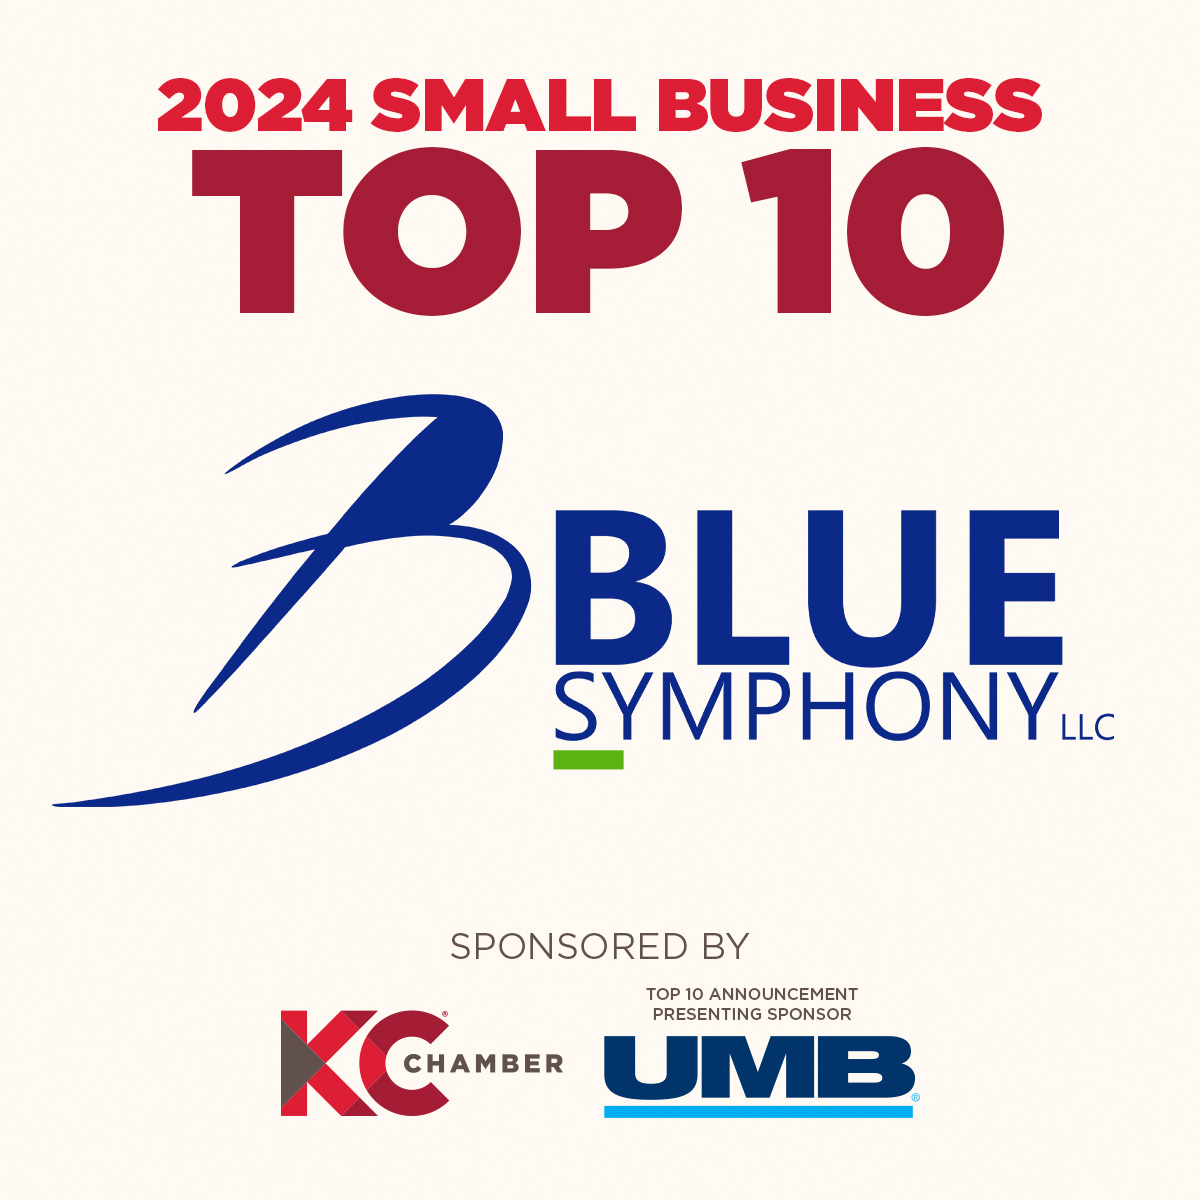 One more hour to go until the full list of Top 10 Small Businesses for 2024 is revealed. Who is the next to be announced? @bluesymphonykc, that’s who! #CelebrateSmallBiz